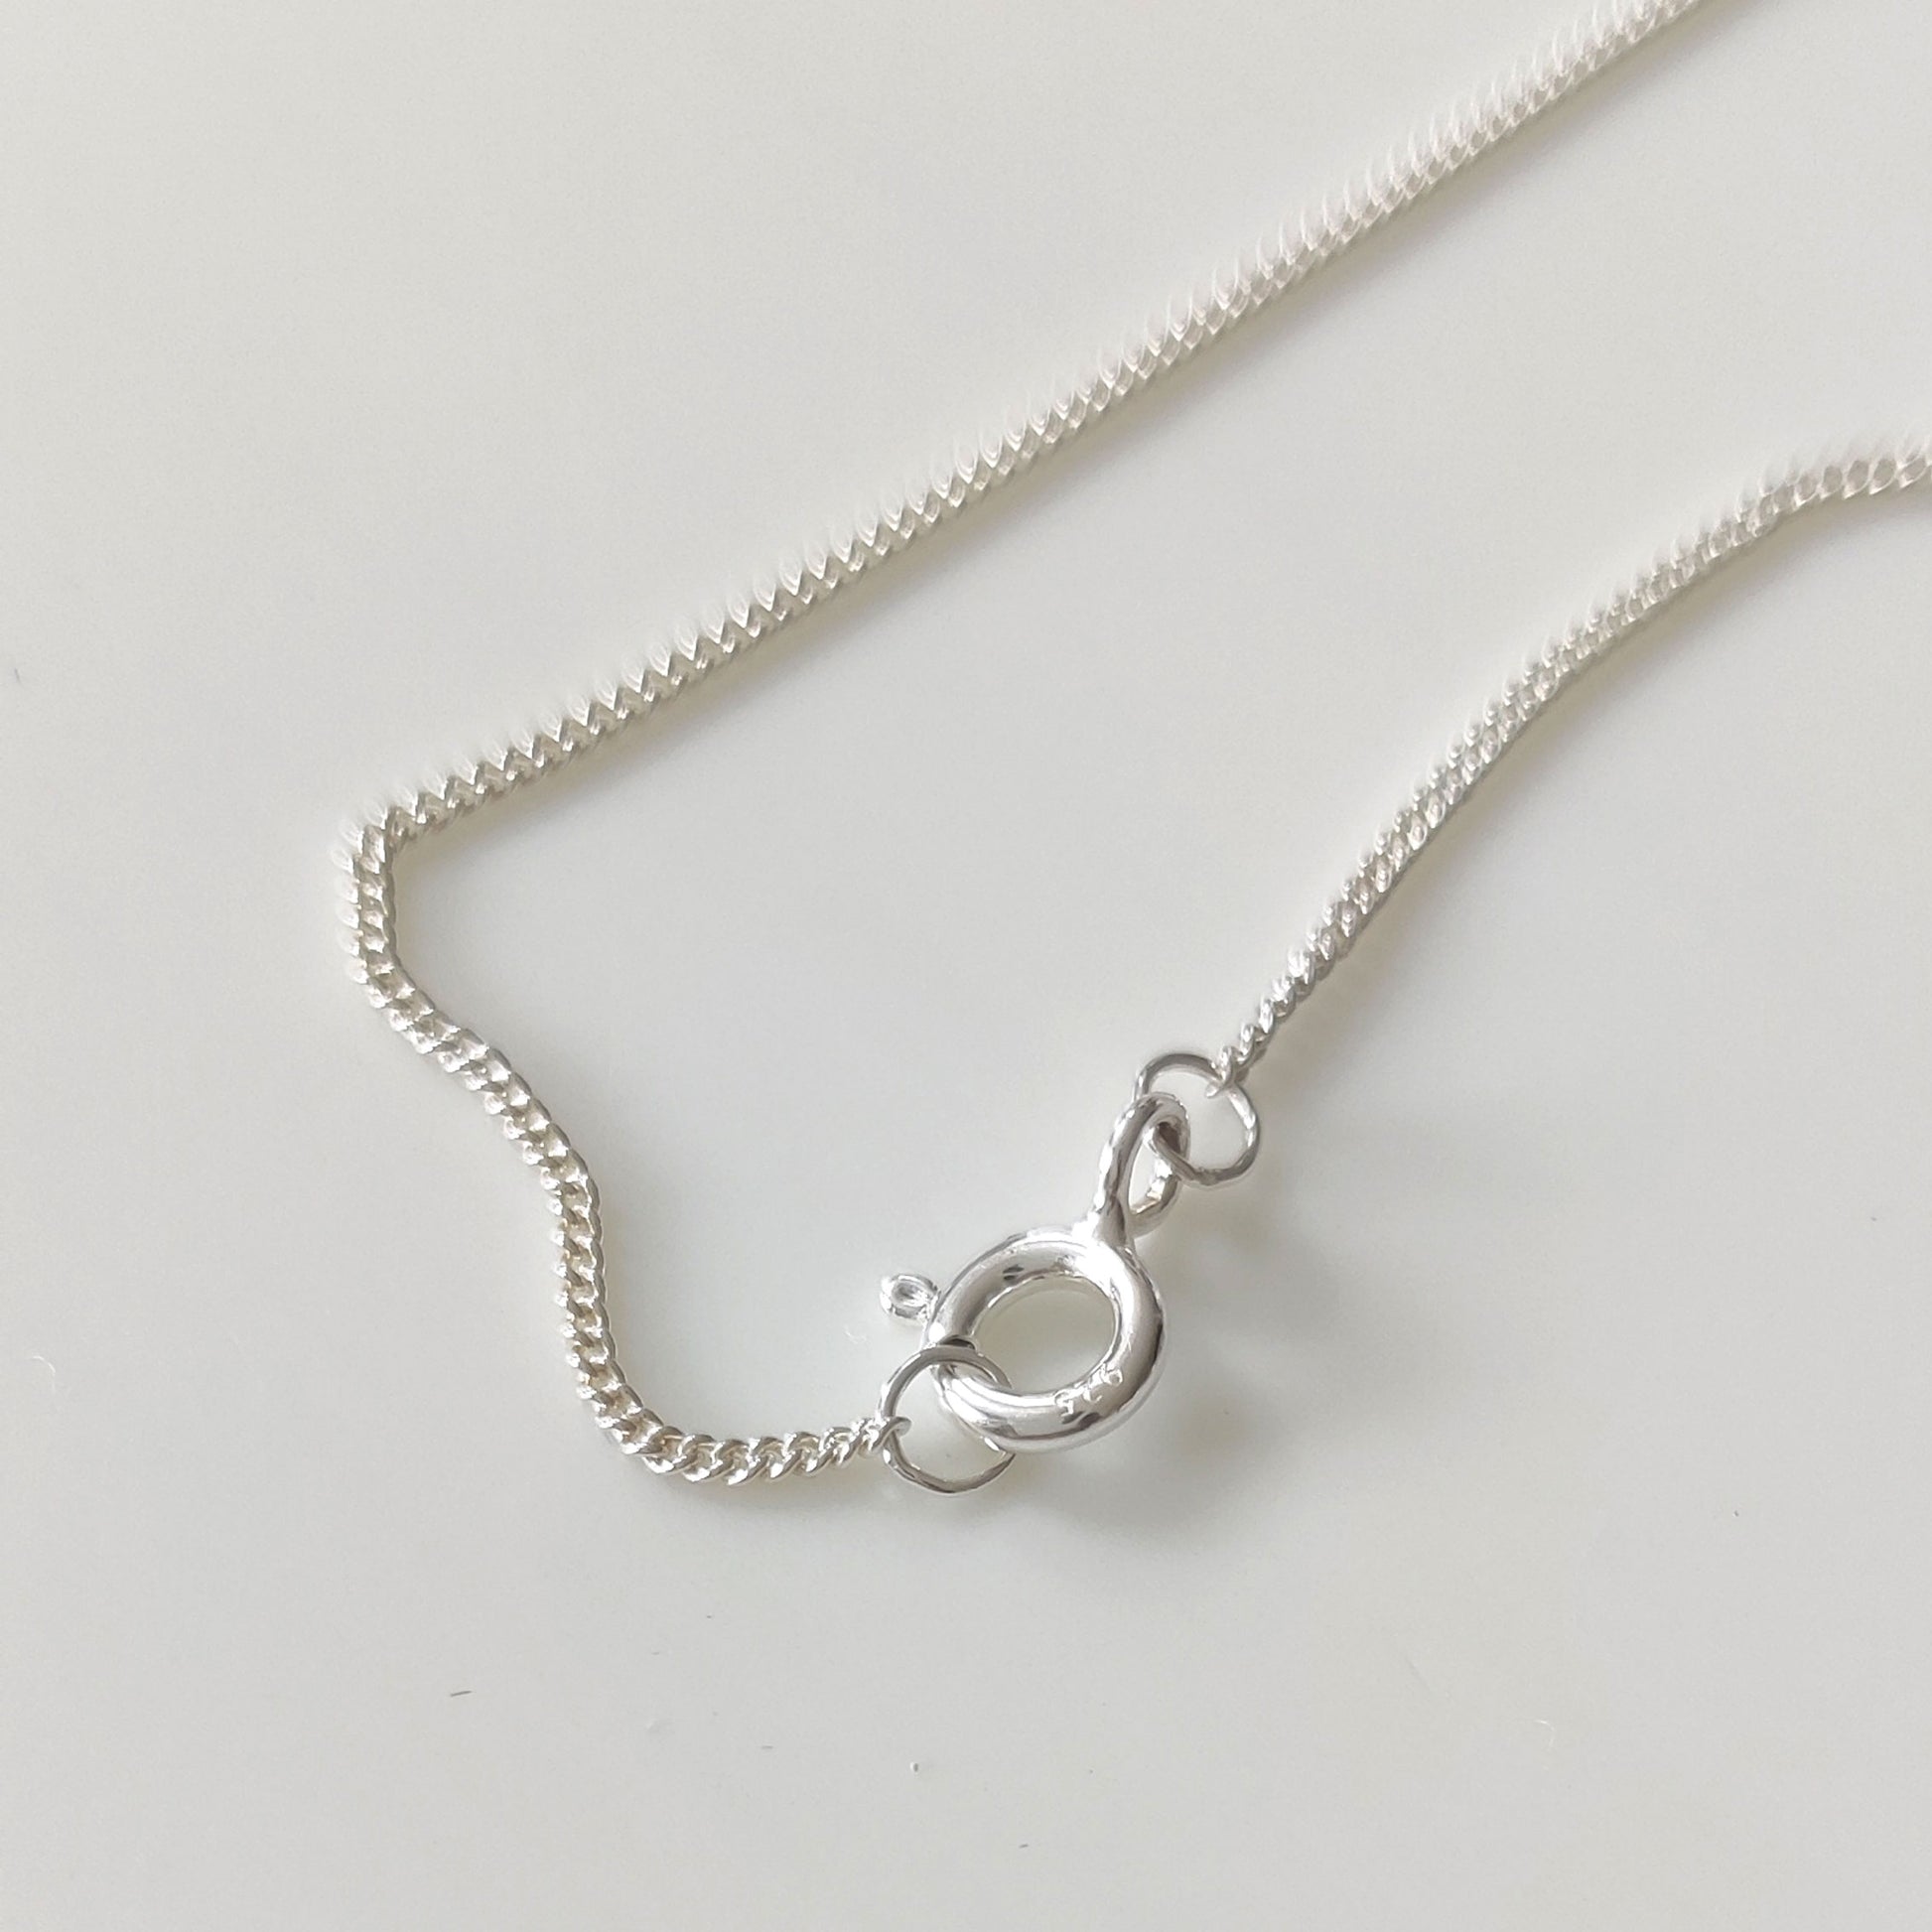 Silver curb chain by Notion Jewellery. 